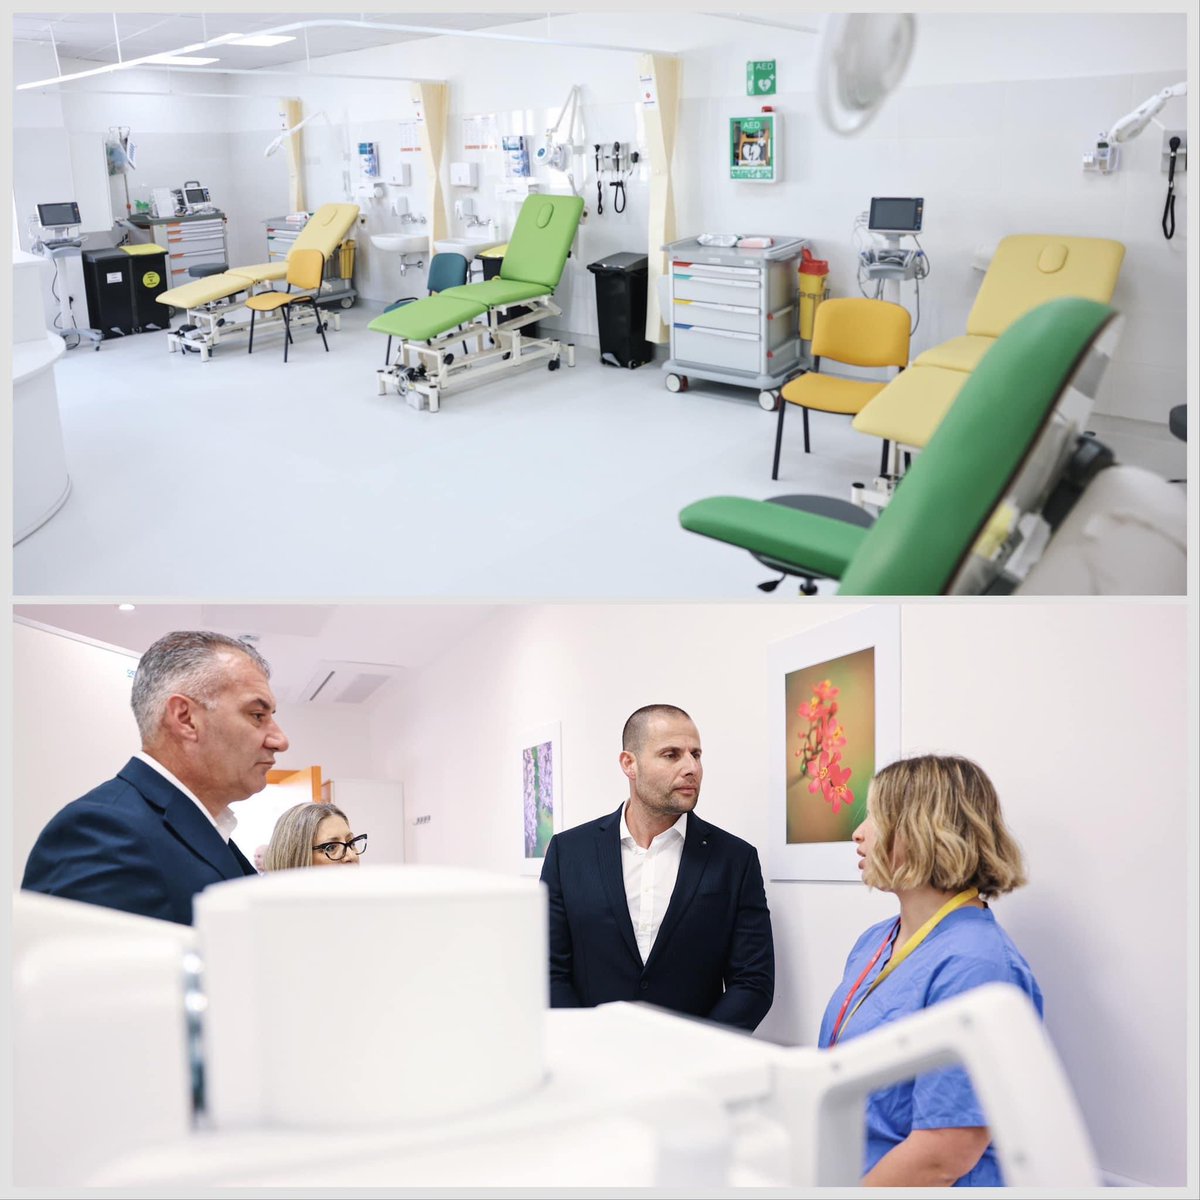 Inaugurated the modernization of the Qormi Health Centre with an investment of €2.8 million. Through the renovation that has been carried out, no less than 23 services of the highest level will now be offered to the people who live in Qormi as well as in the surrounding area.